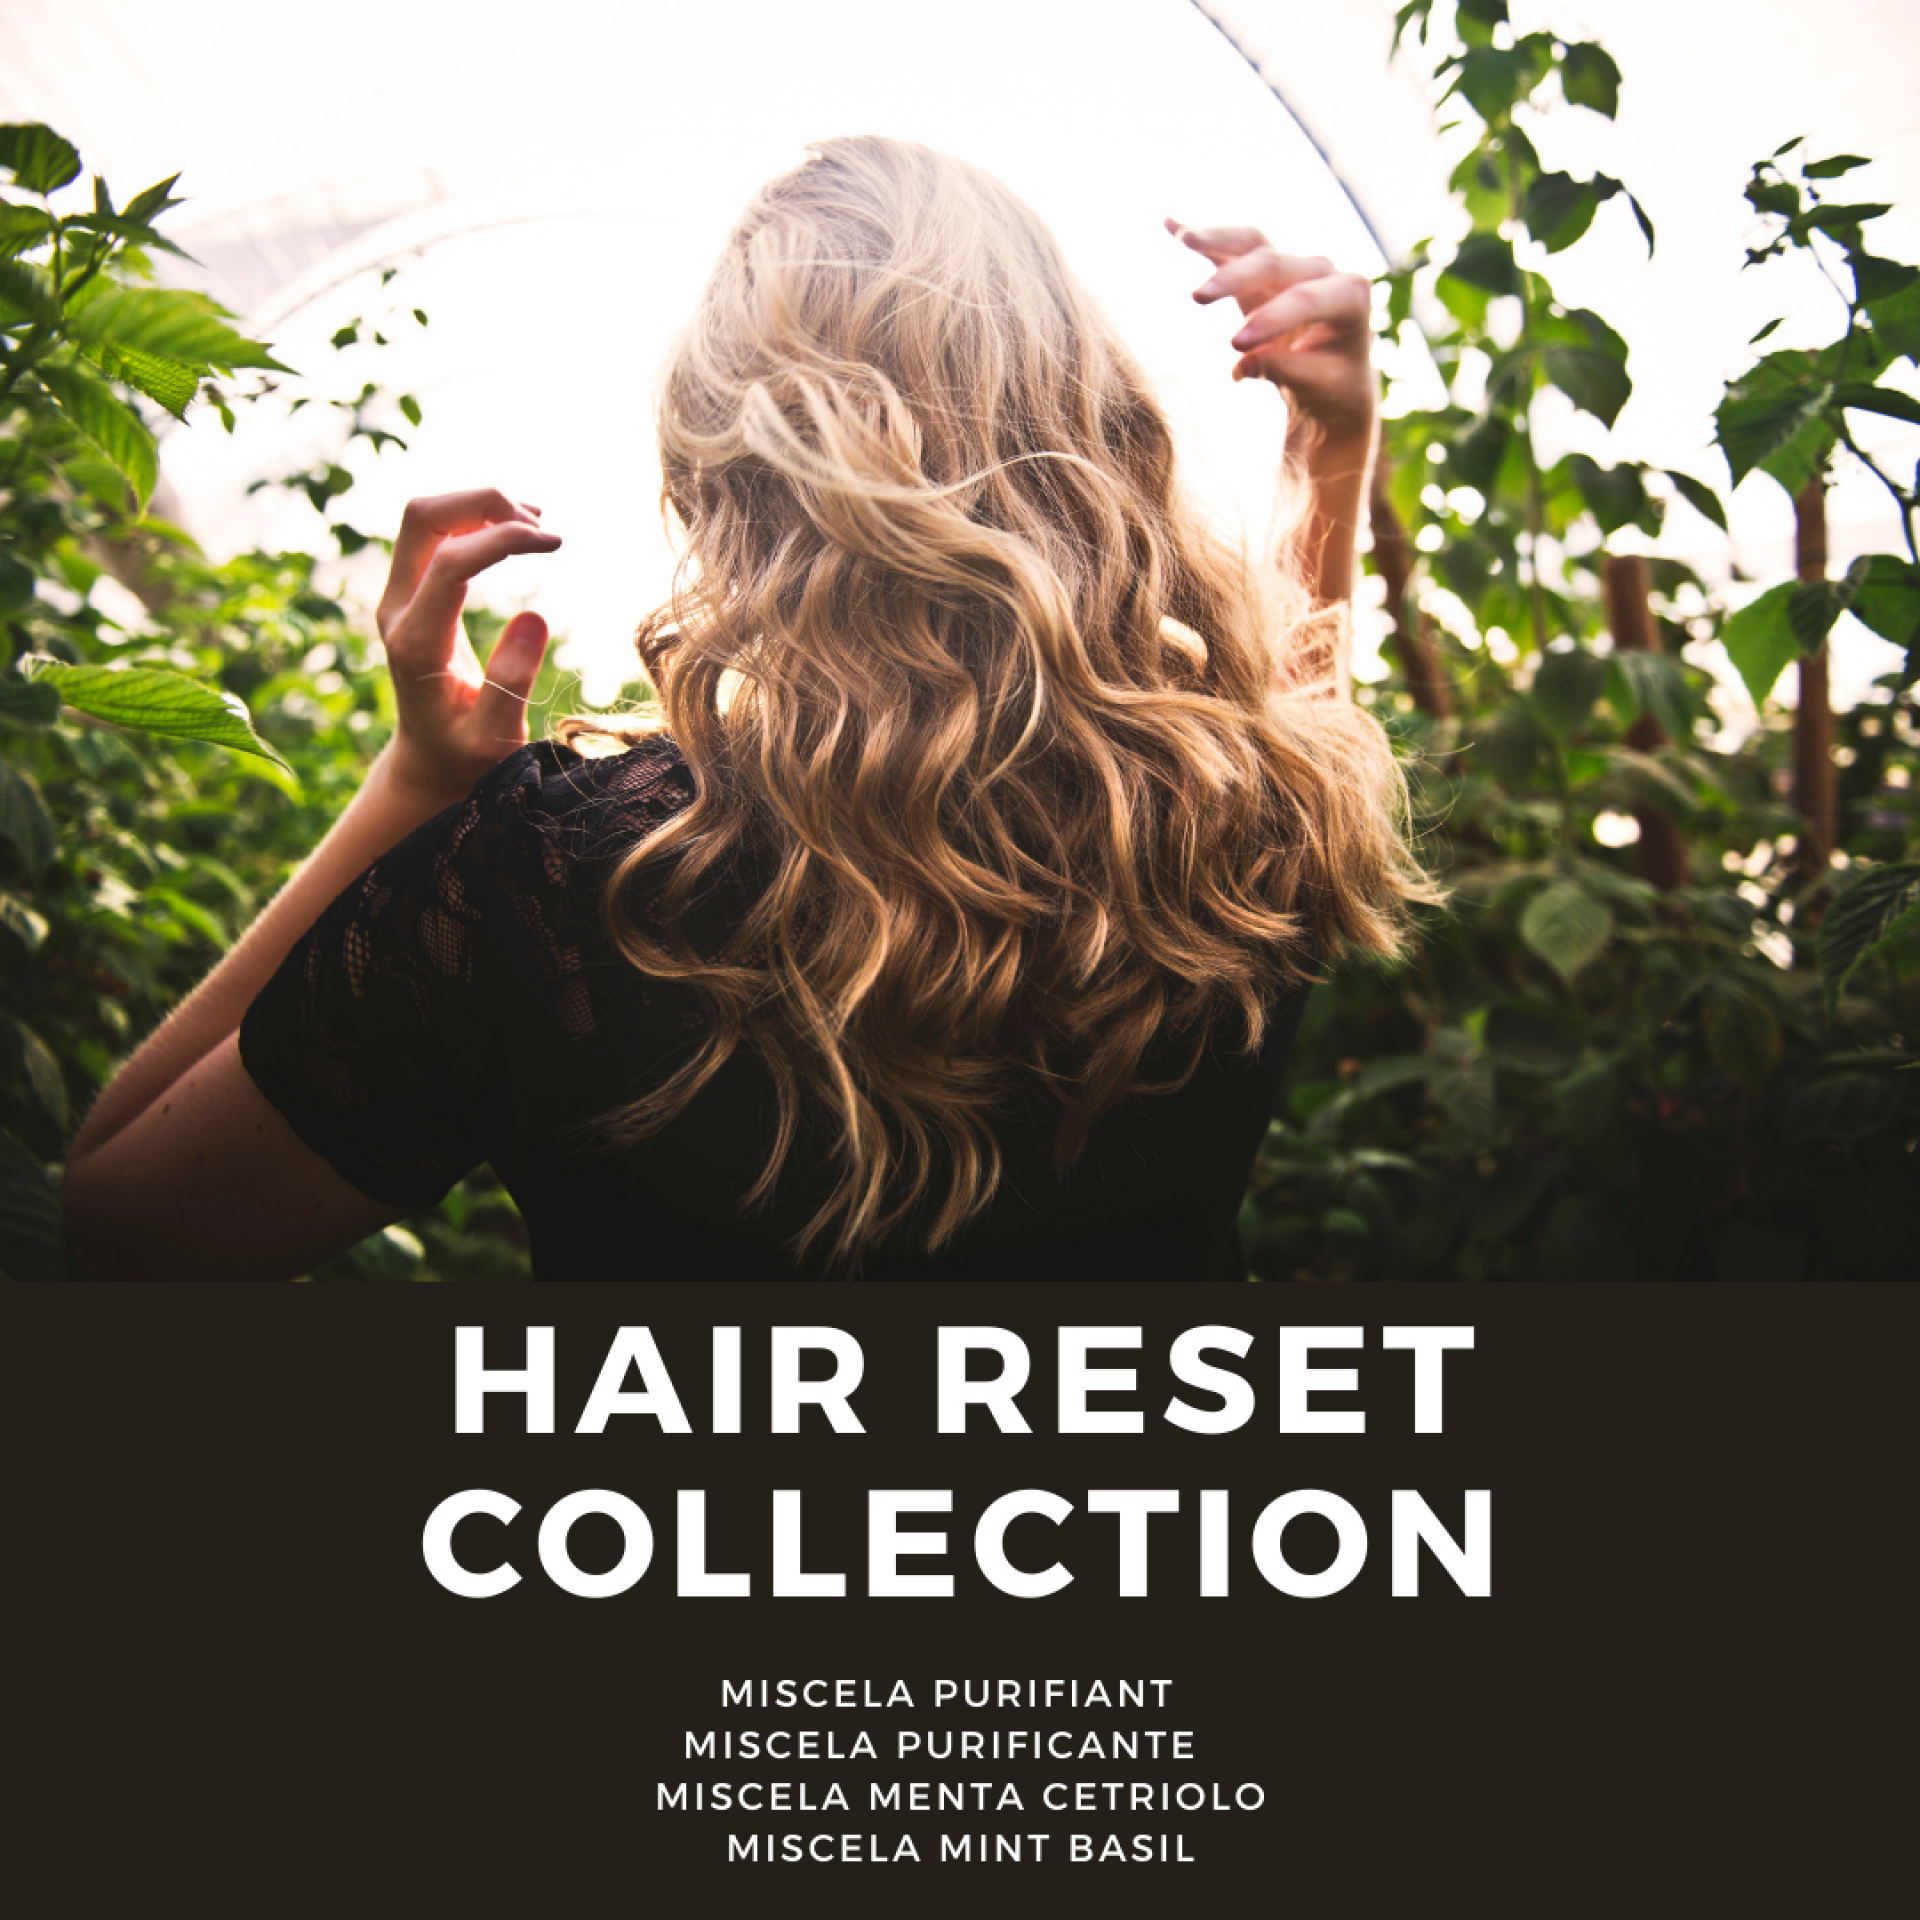 HAIR RESET COLLECTION